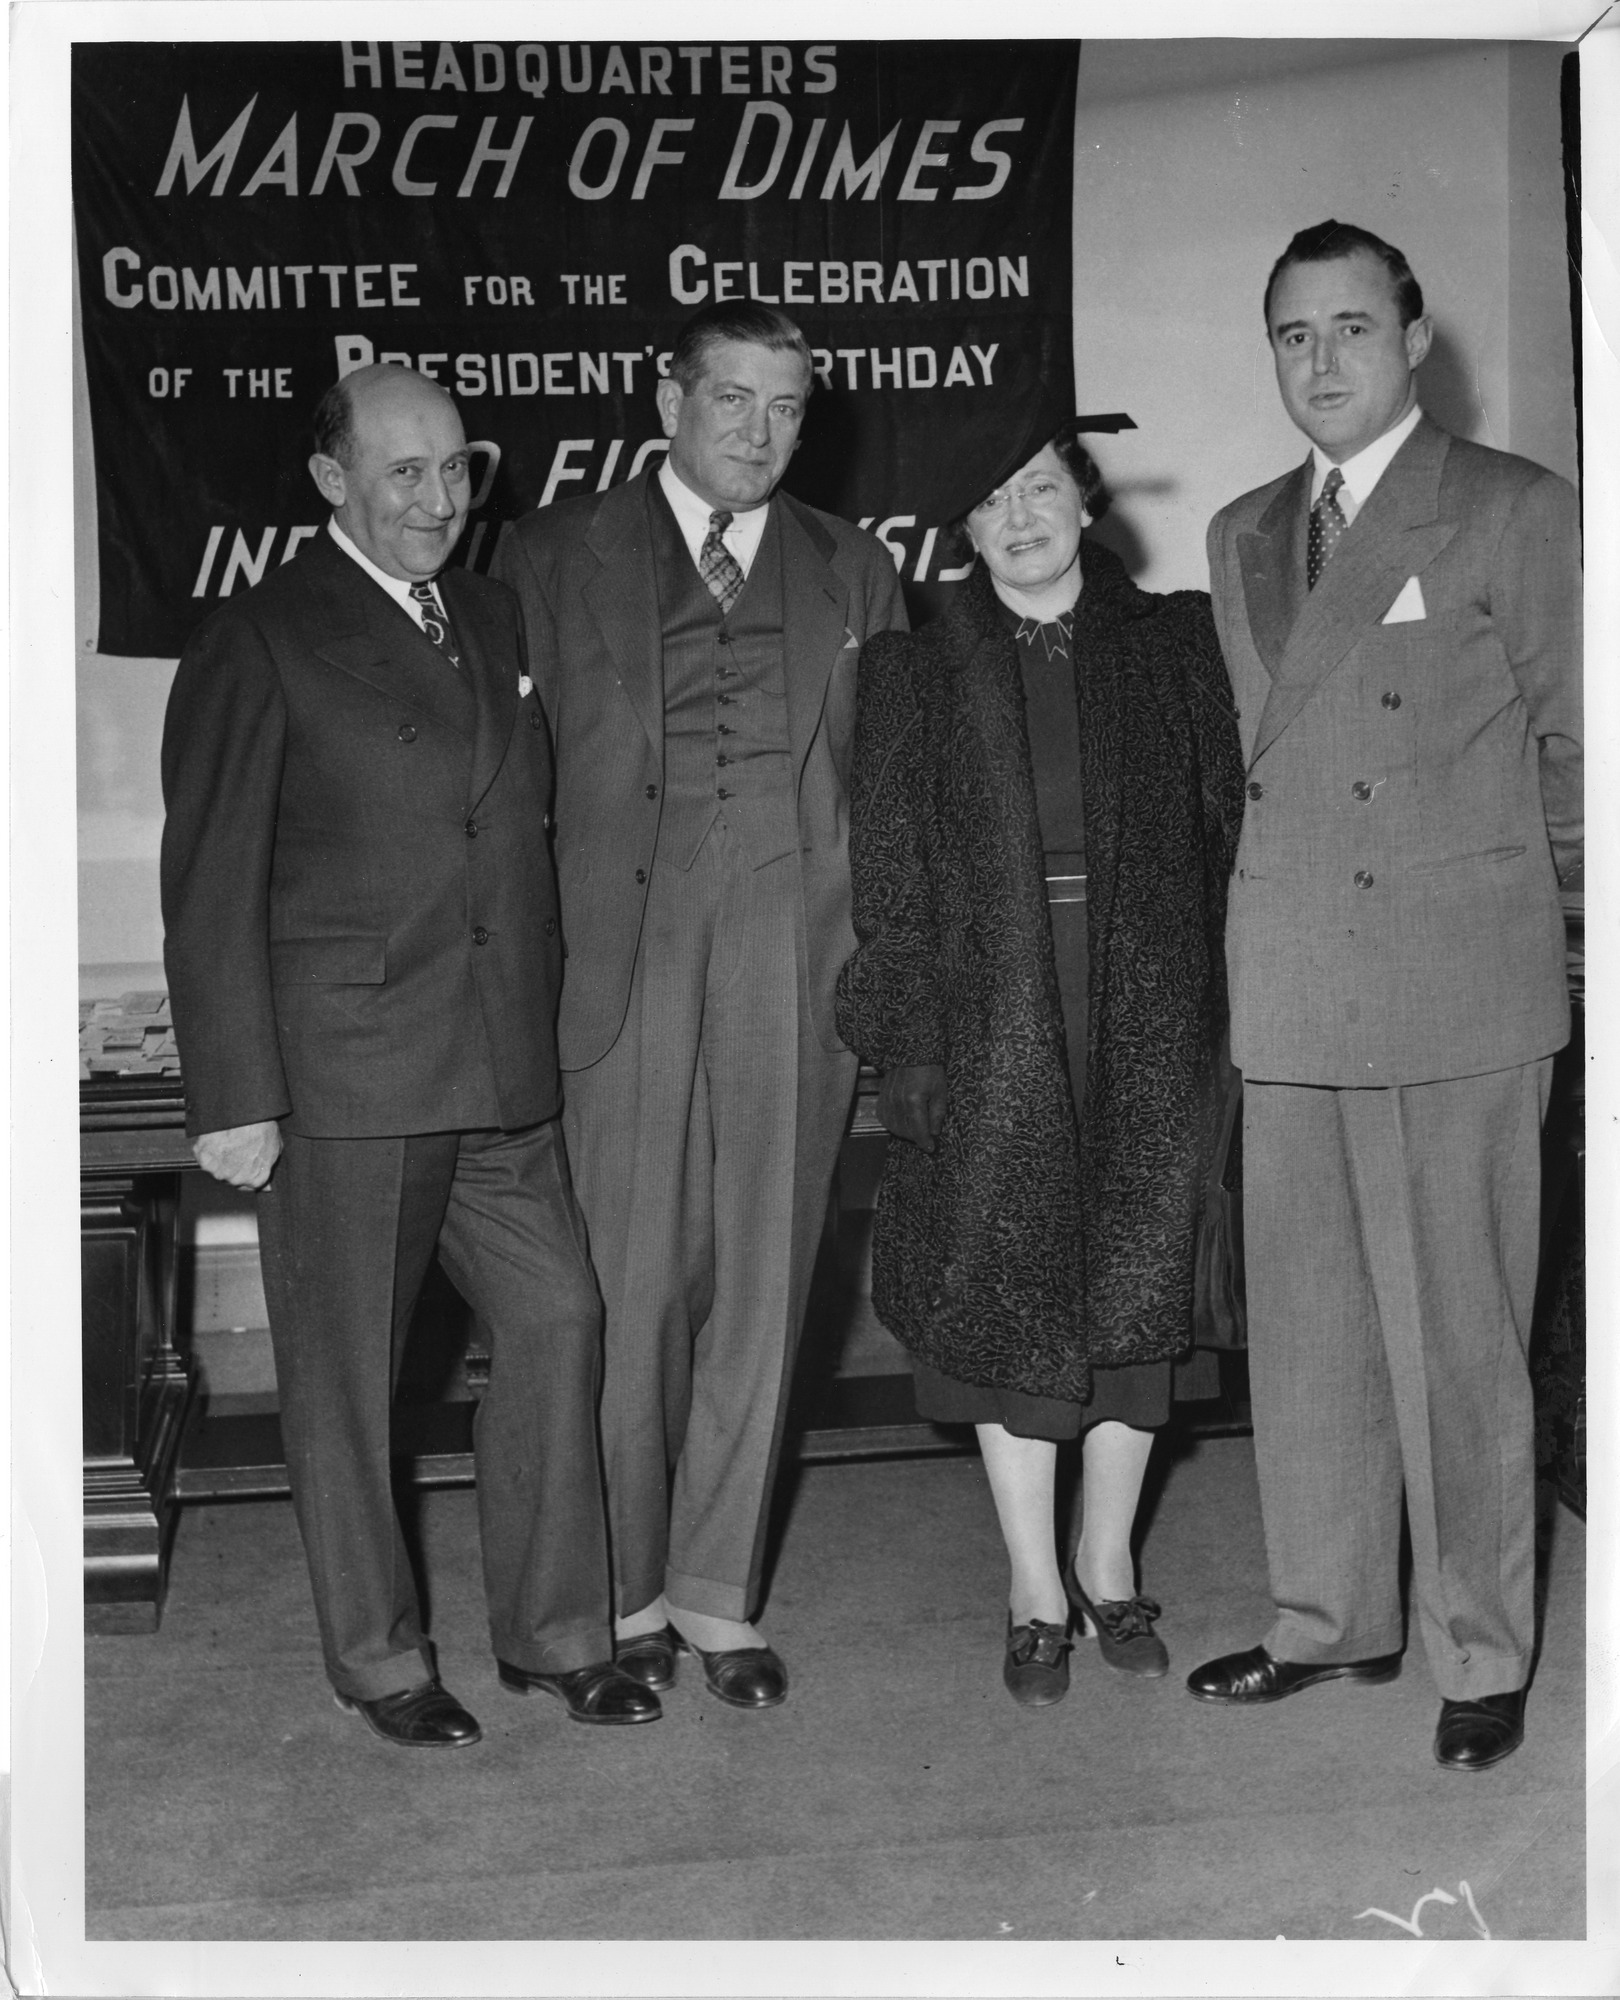 (left to right) Morris Fishbein (1889-1976); Felix Joel Underwood (1882-1959); Anna Mantel Fishbein, wife of Morris Fishbein; and Keith Morgan (5493776939)